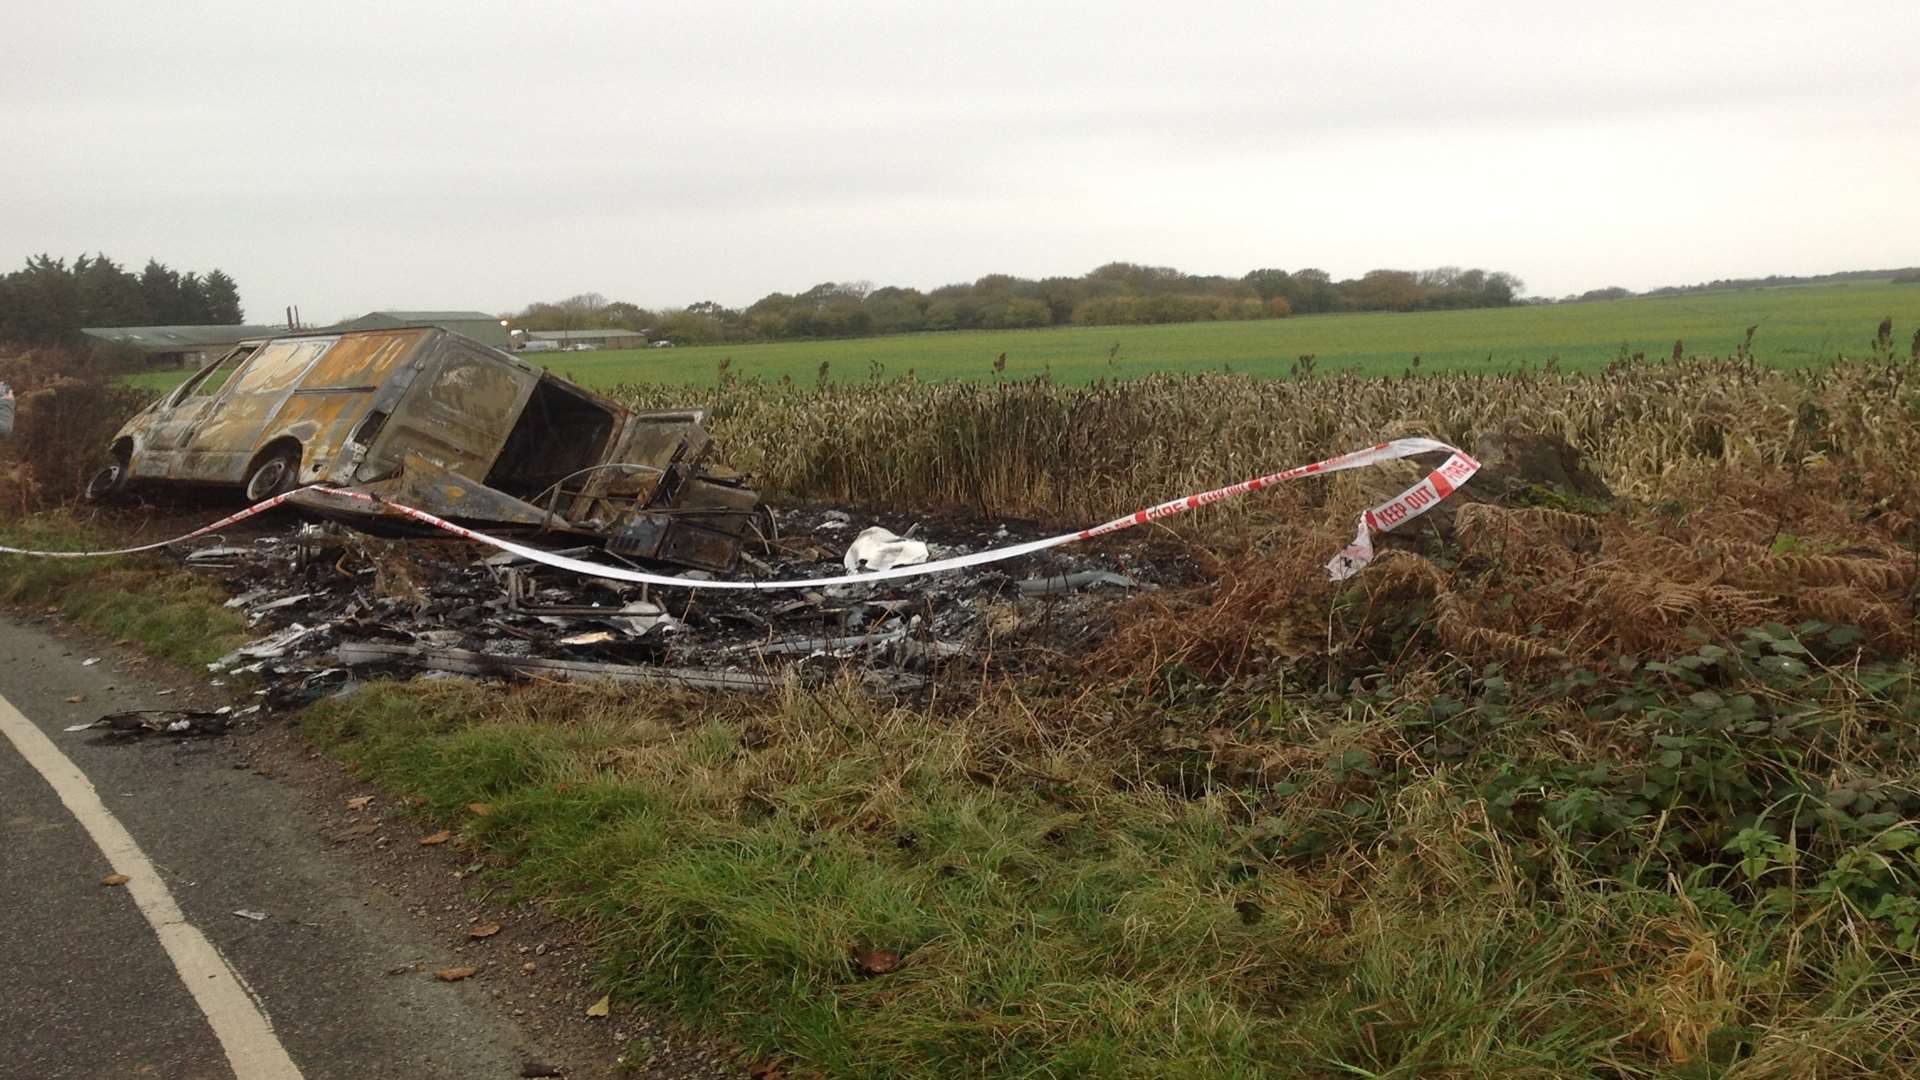 The burnt remains of the pair's £20,000 caravan, which was torched after its theft went wrong